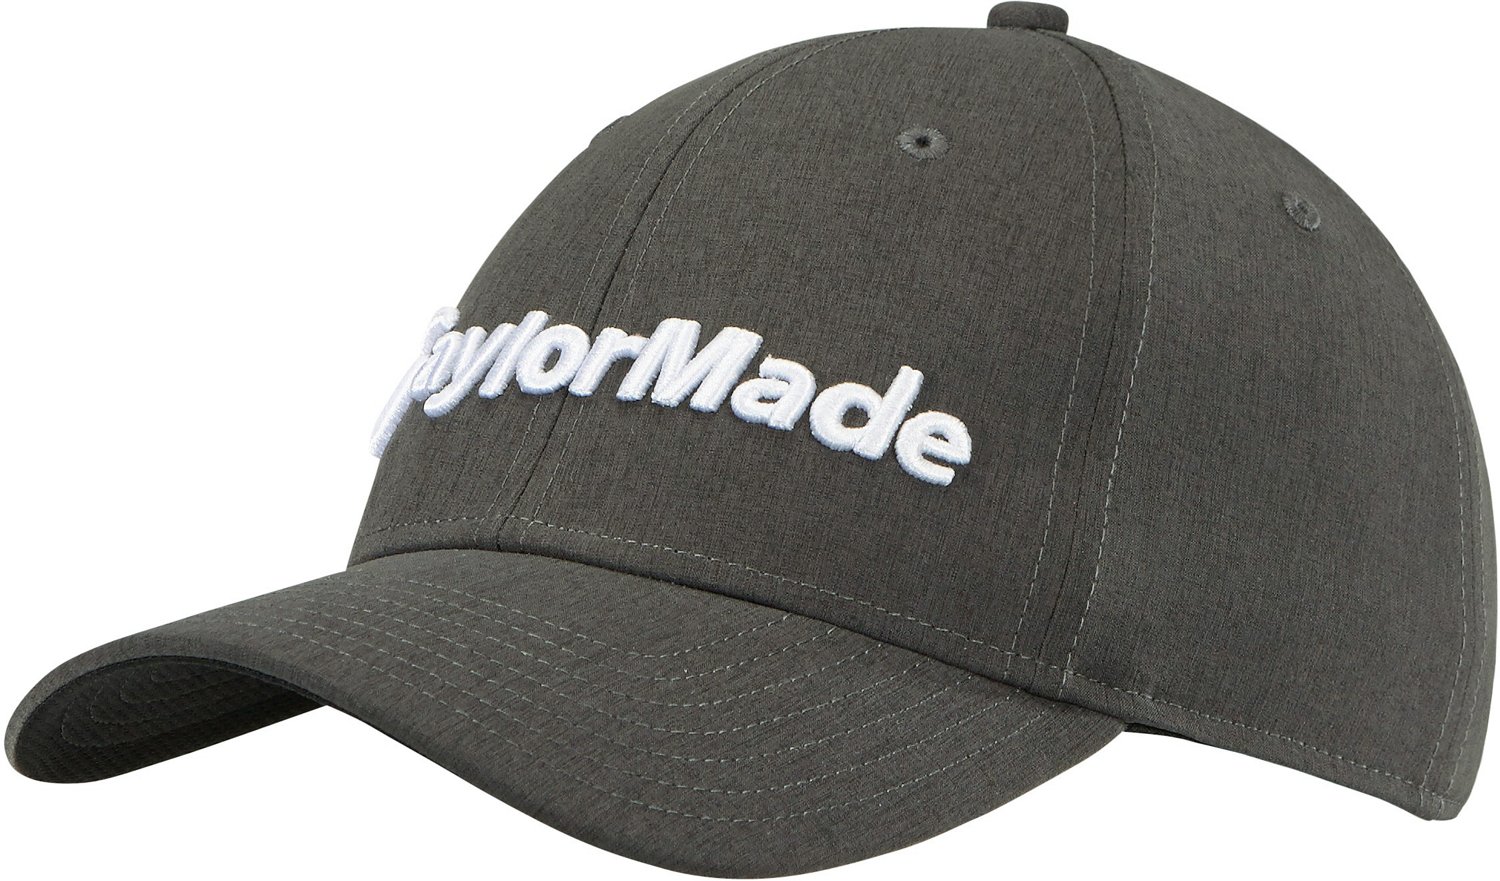 TaylorMade Men's Performance Seeker Ball Cap                                                                                     - view number 1 selected